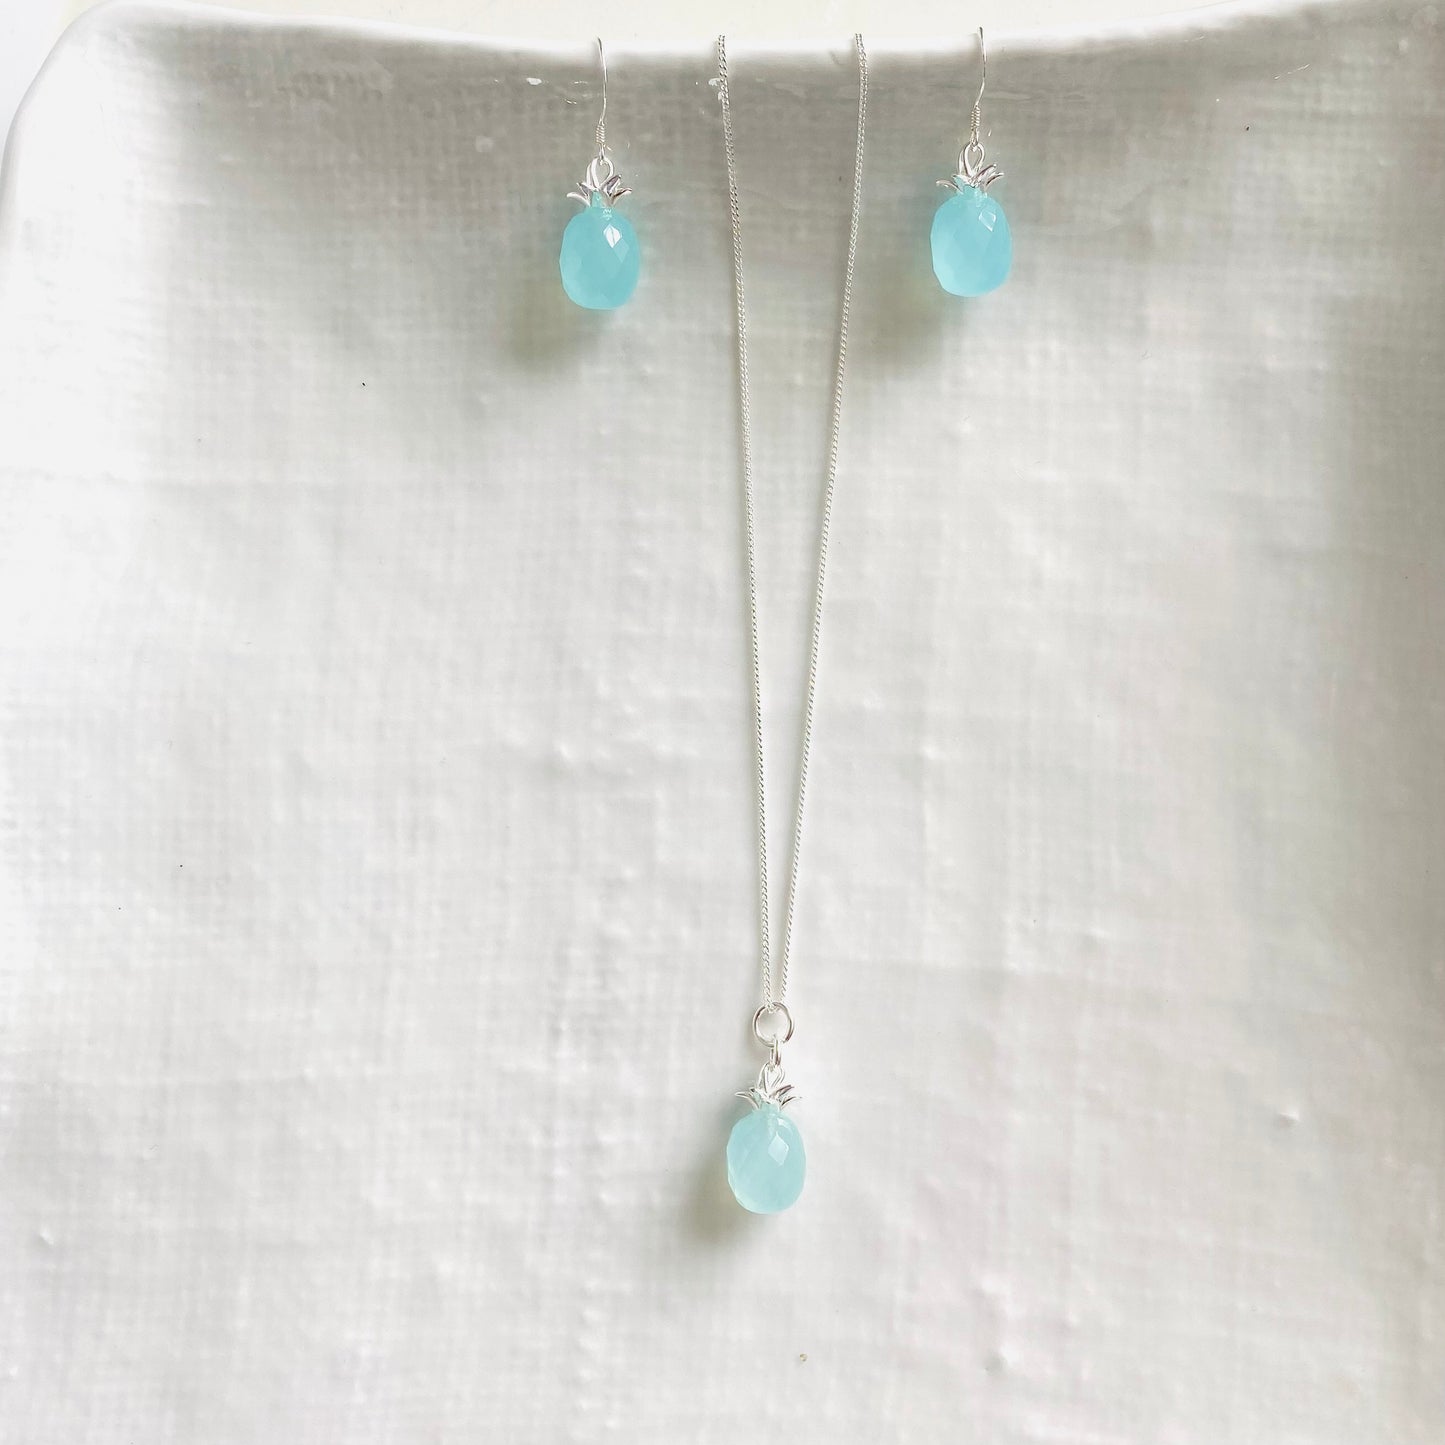 Aqua chalcedony and sterling silver pineapples